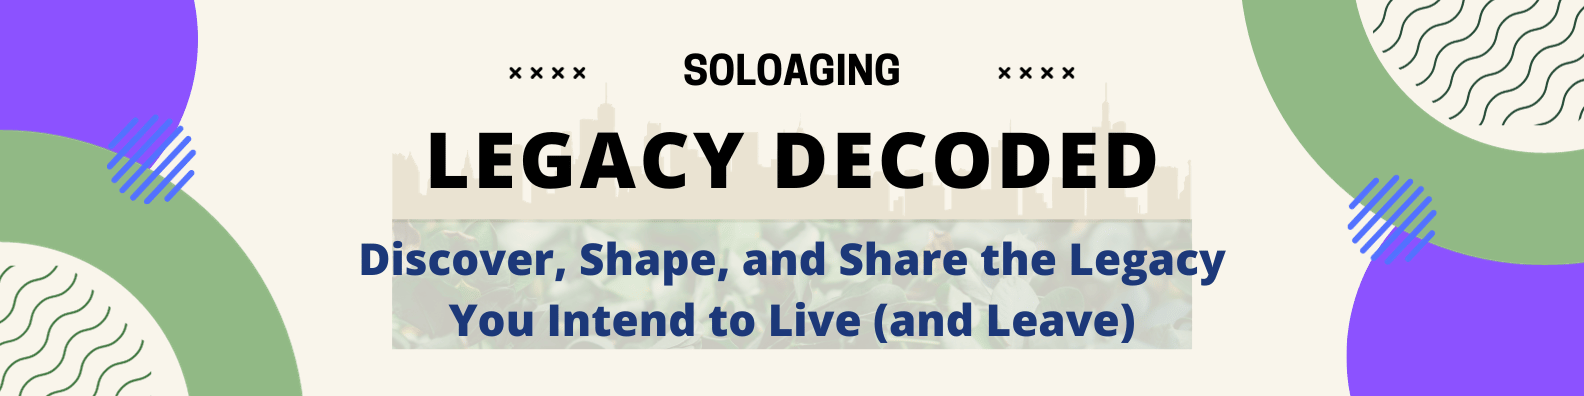 Legacy Decoded